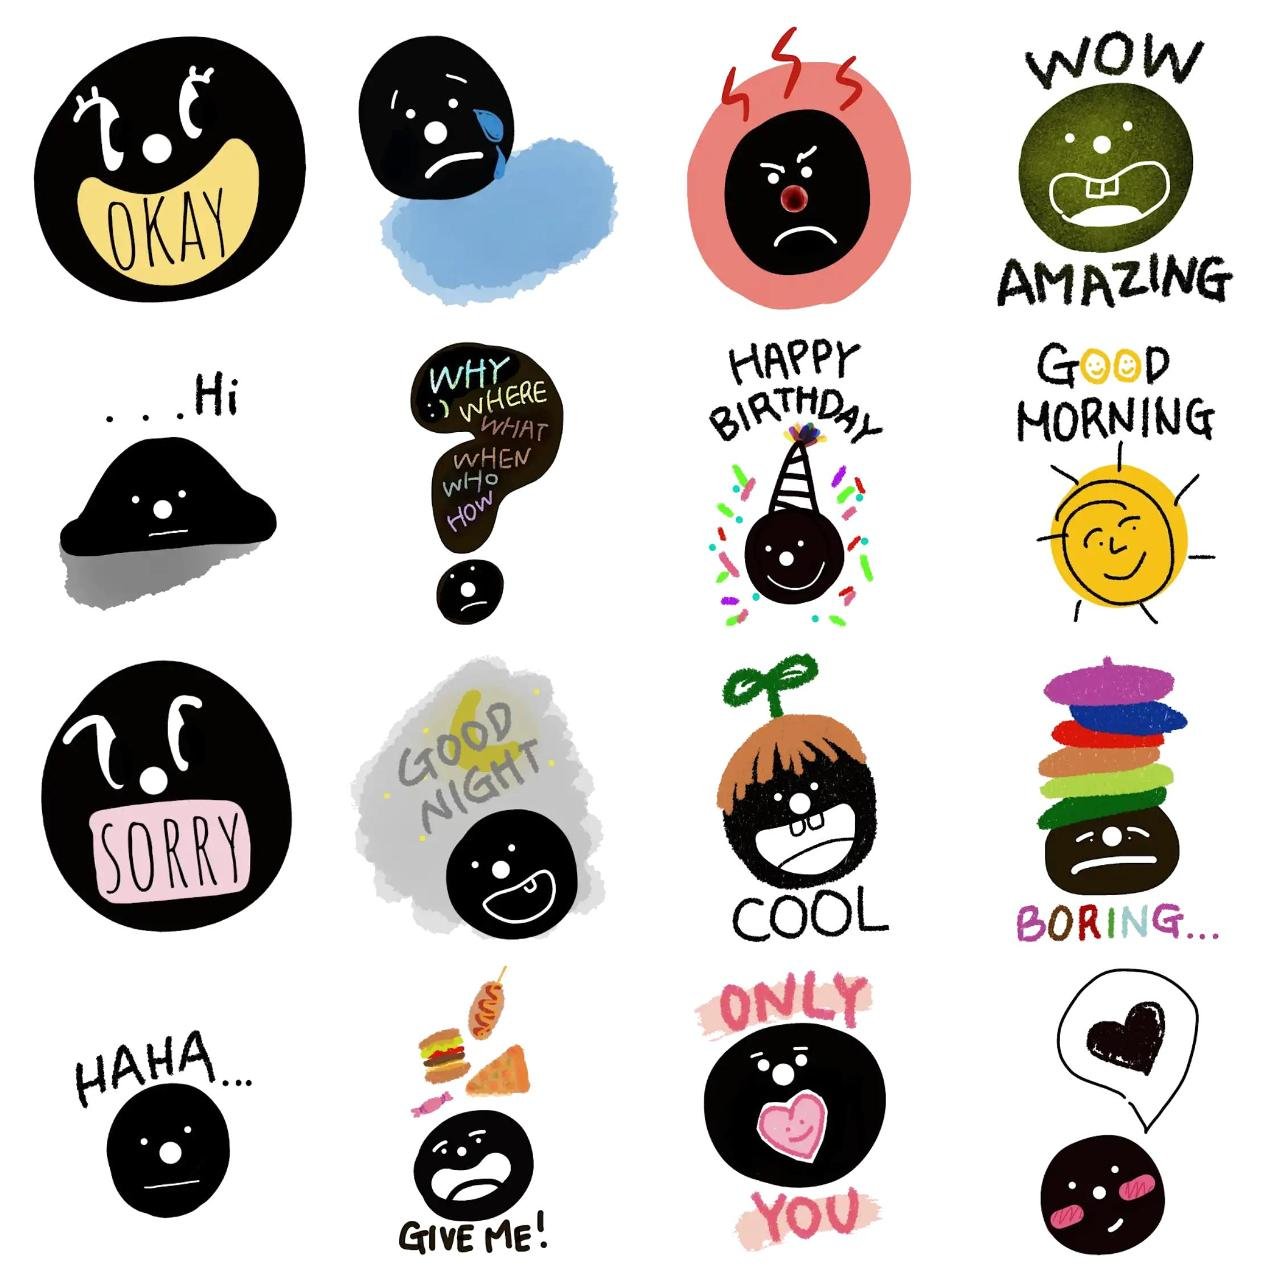 circle's life Animation/Cartoon,Etc. sticker pack for Whatsapp, Telegram, Signal, and others chatting and message apps